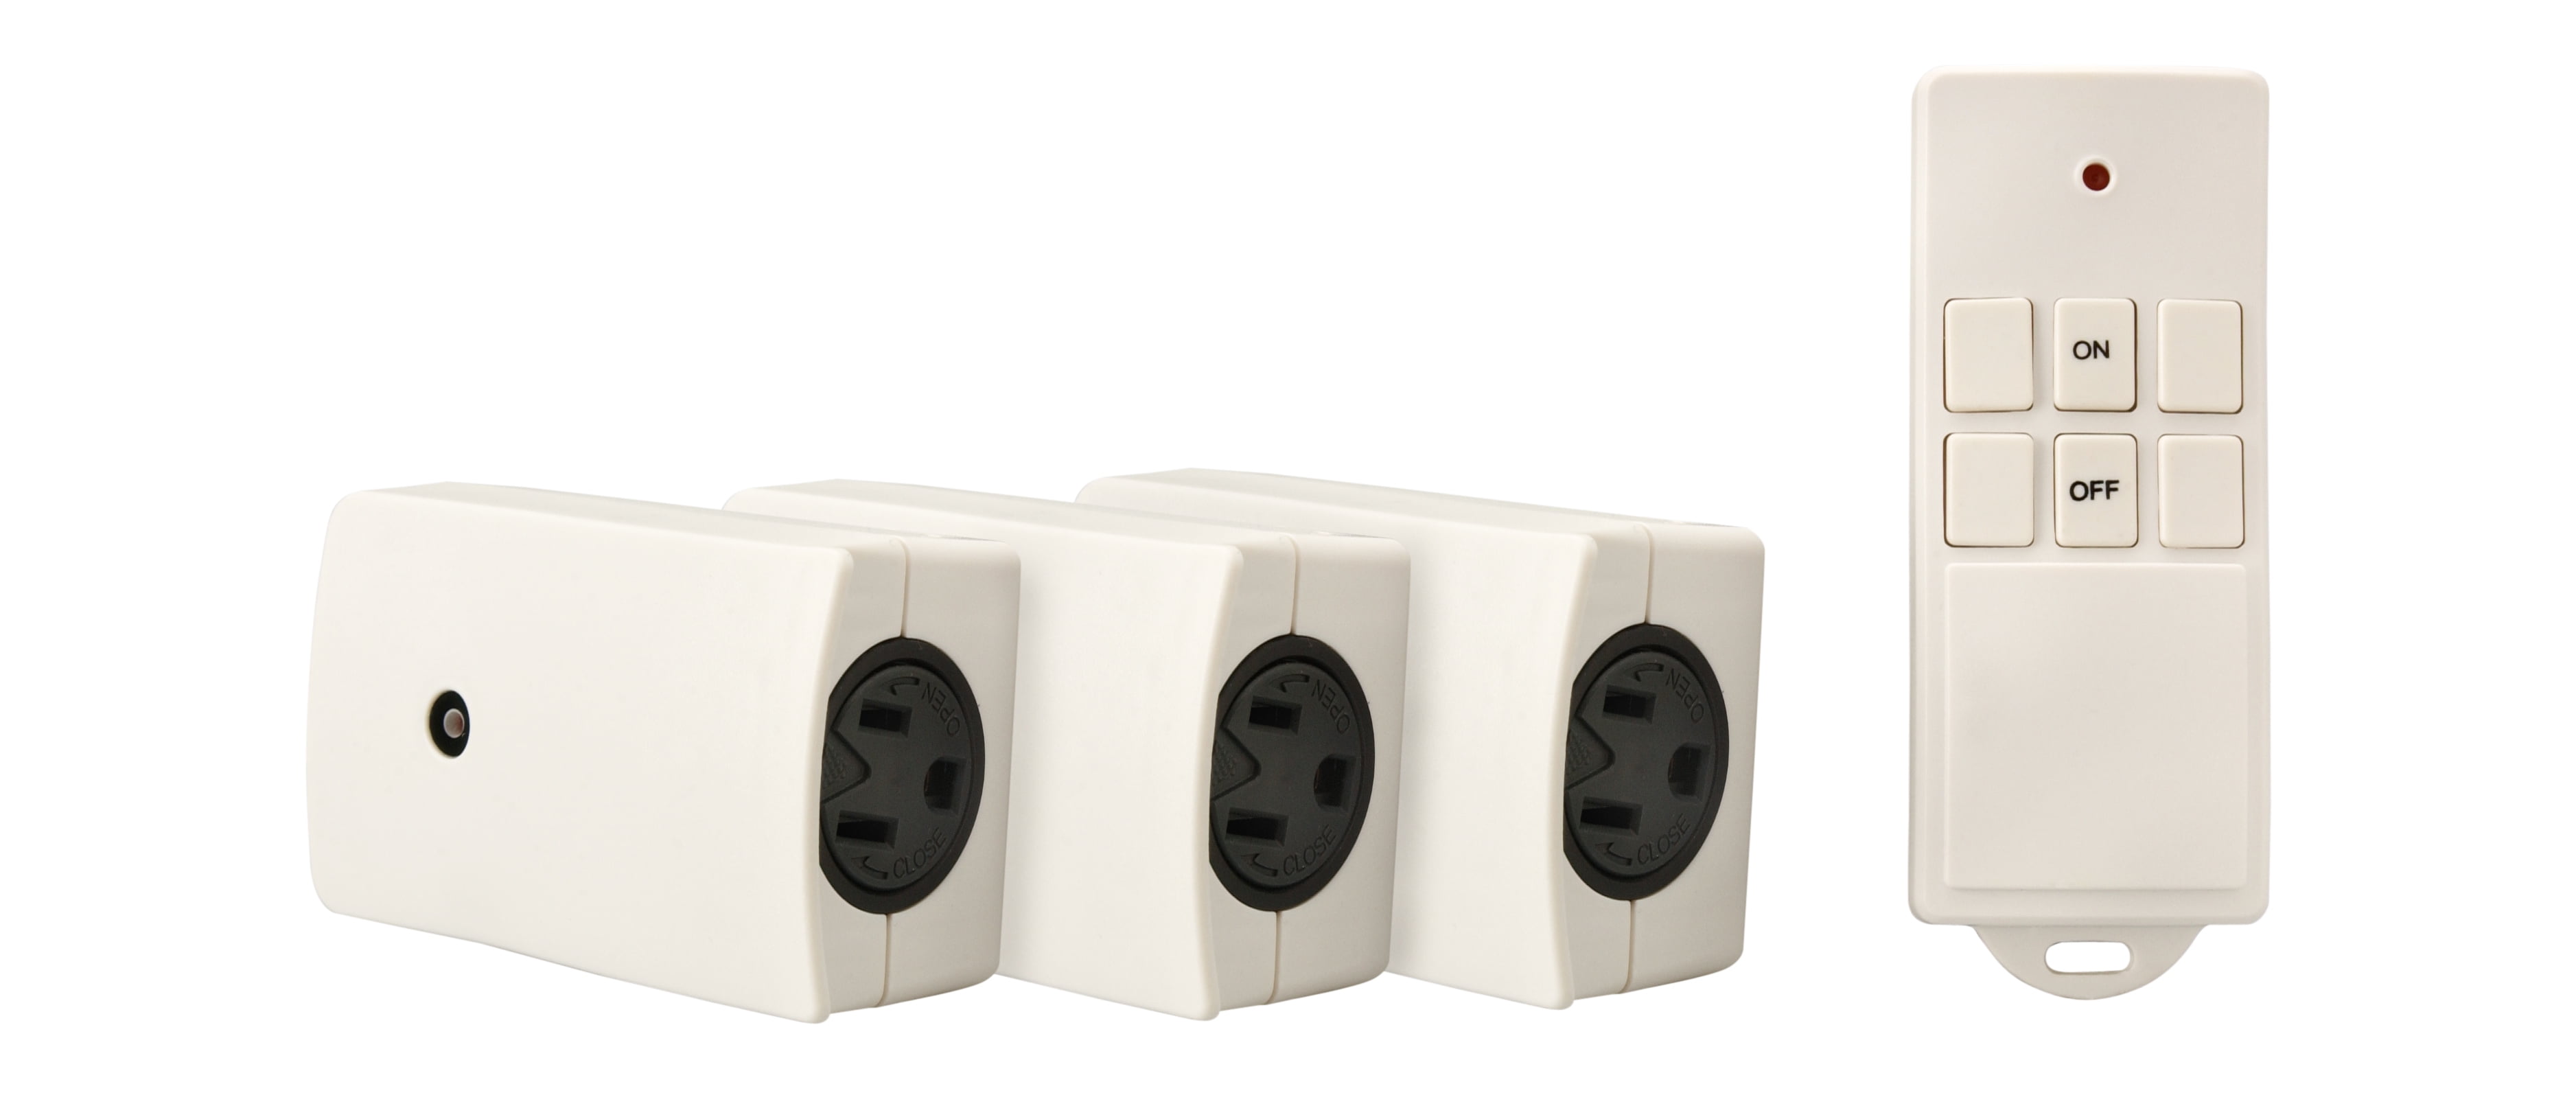 1pk Indoor Wireless Remote Controlled Plug Socket/Outlet